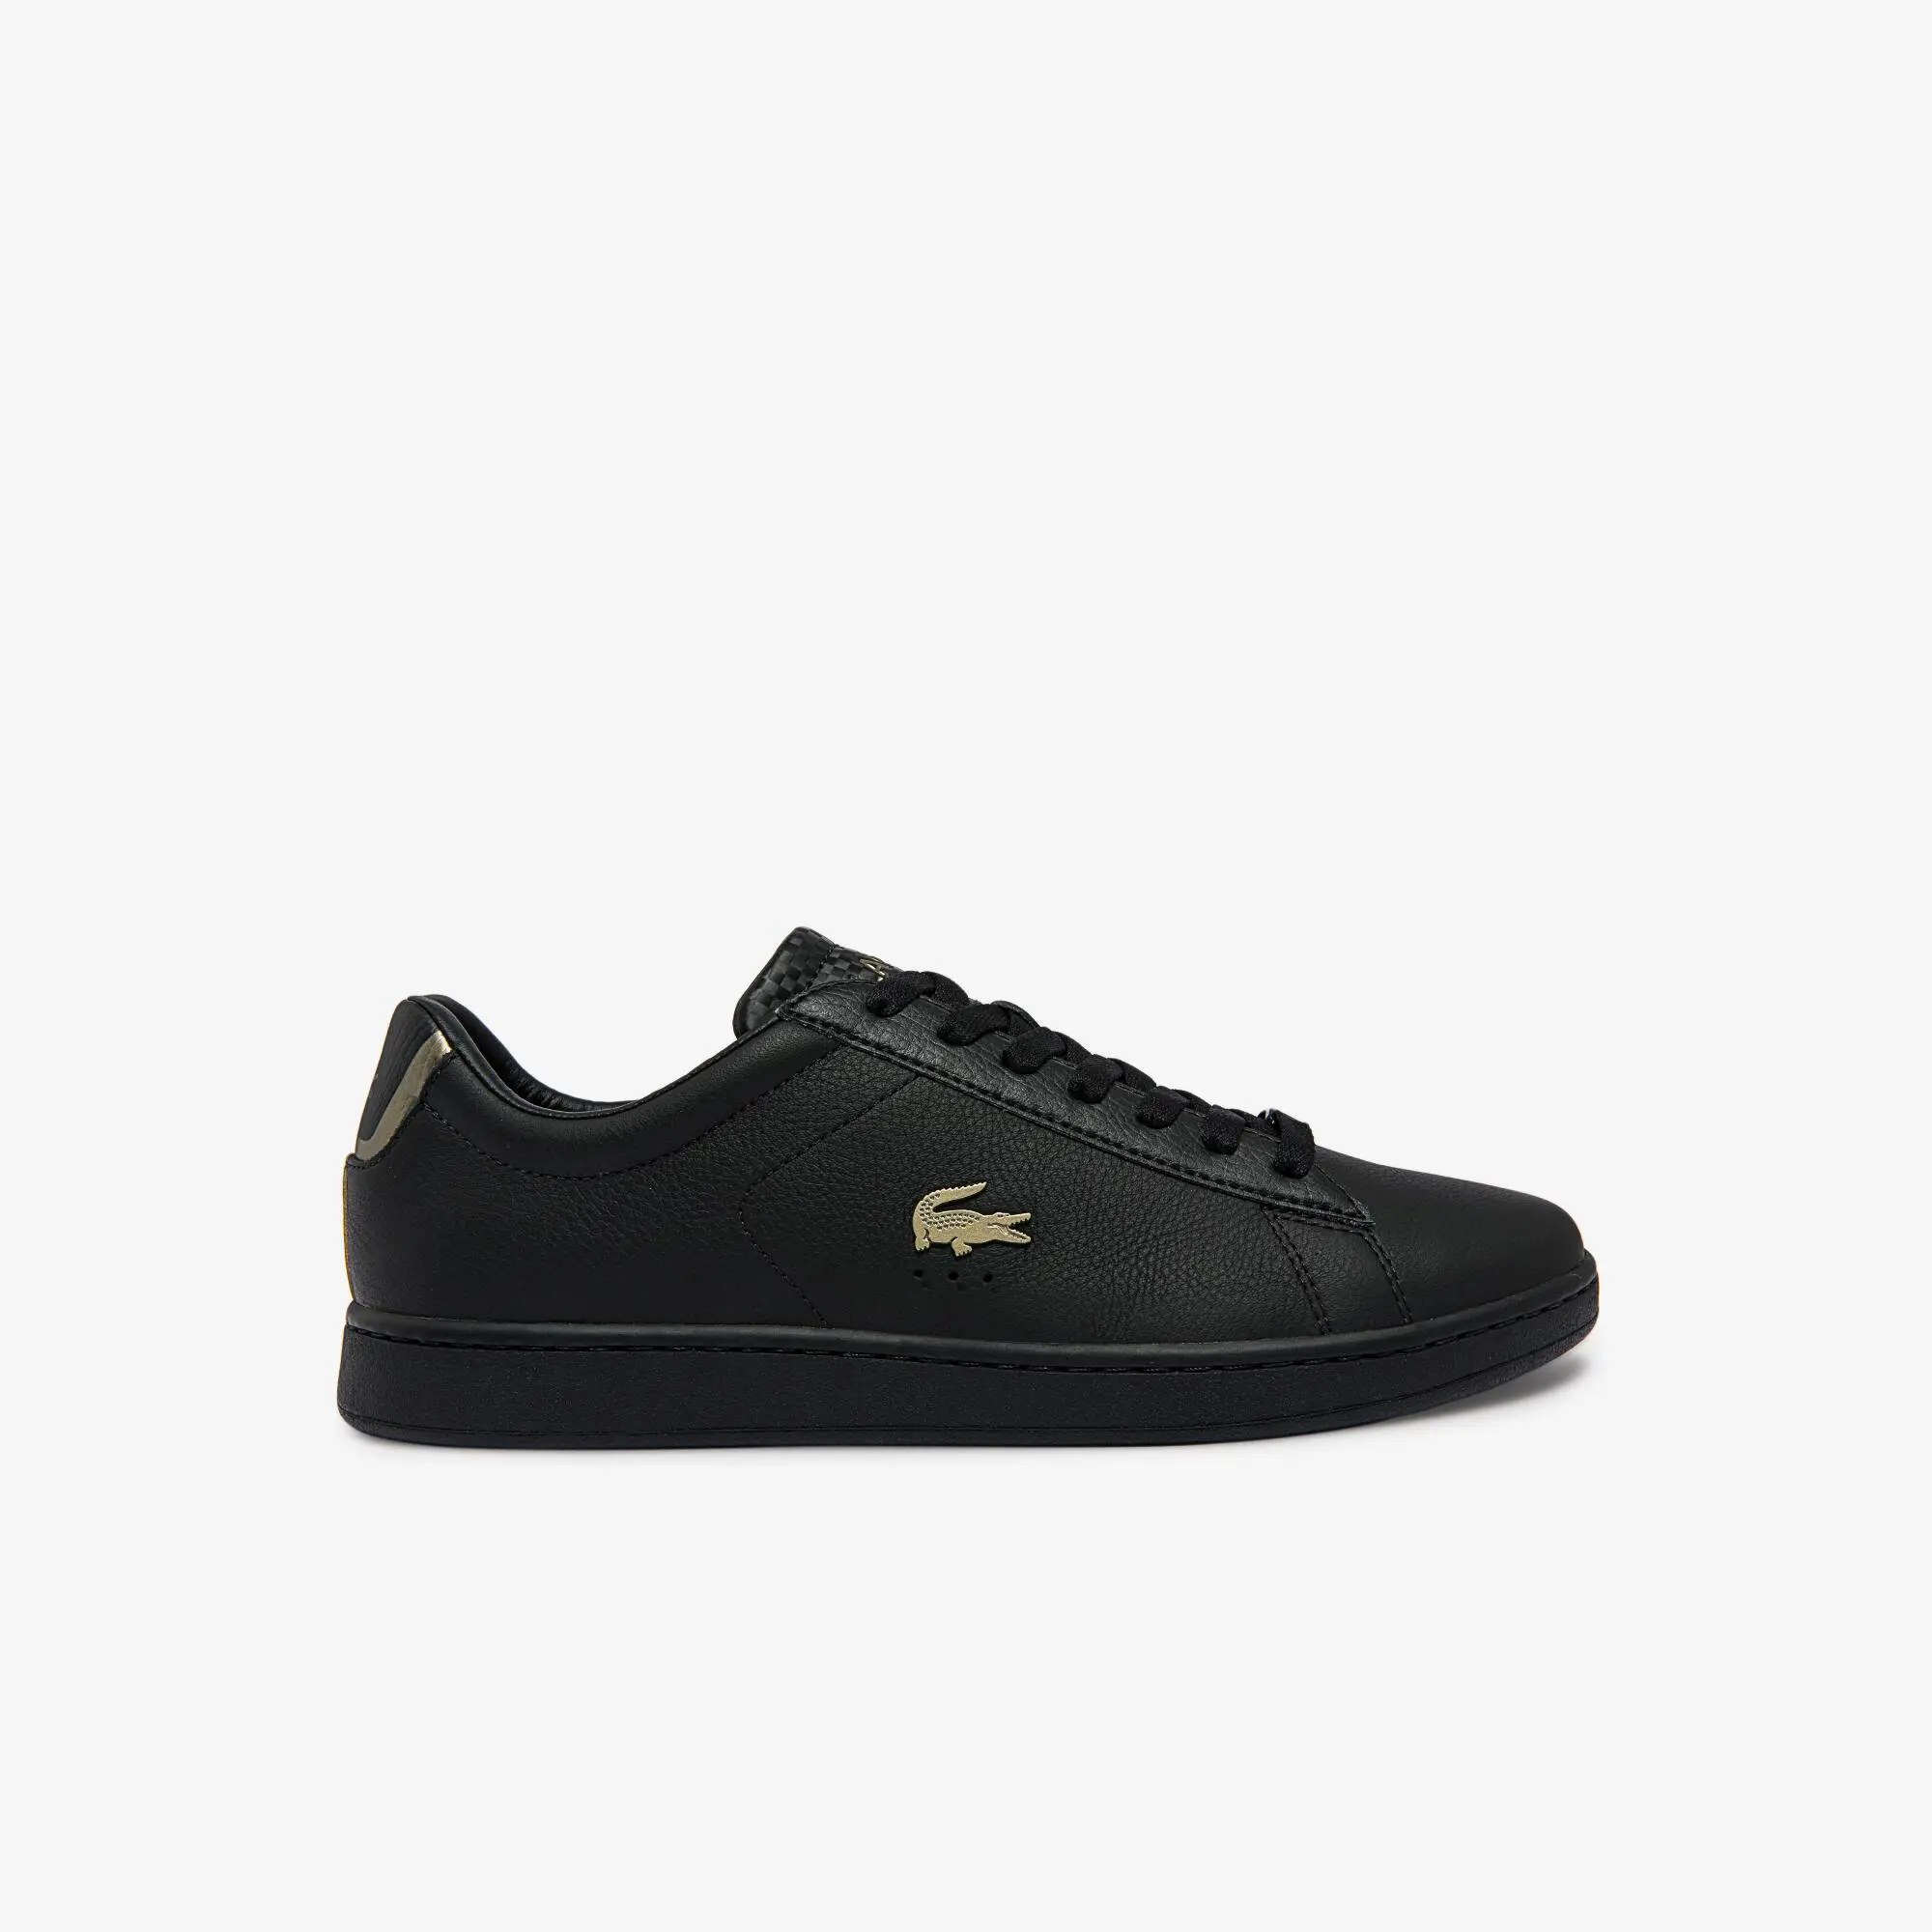 Lacoste Men's Carnaby Evo Leather Platinum Detailing Trainers. 1